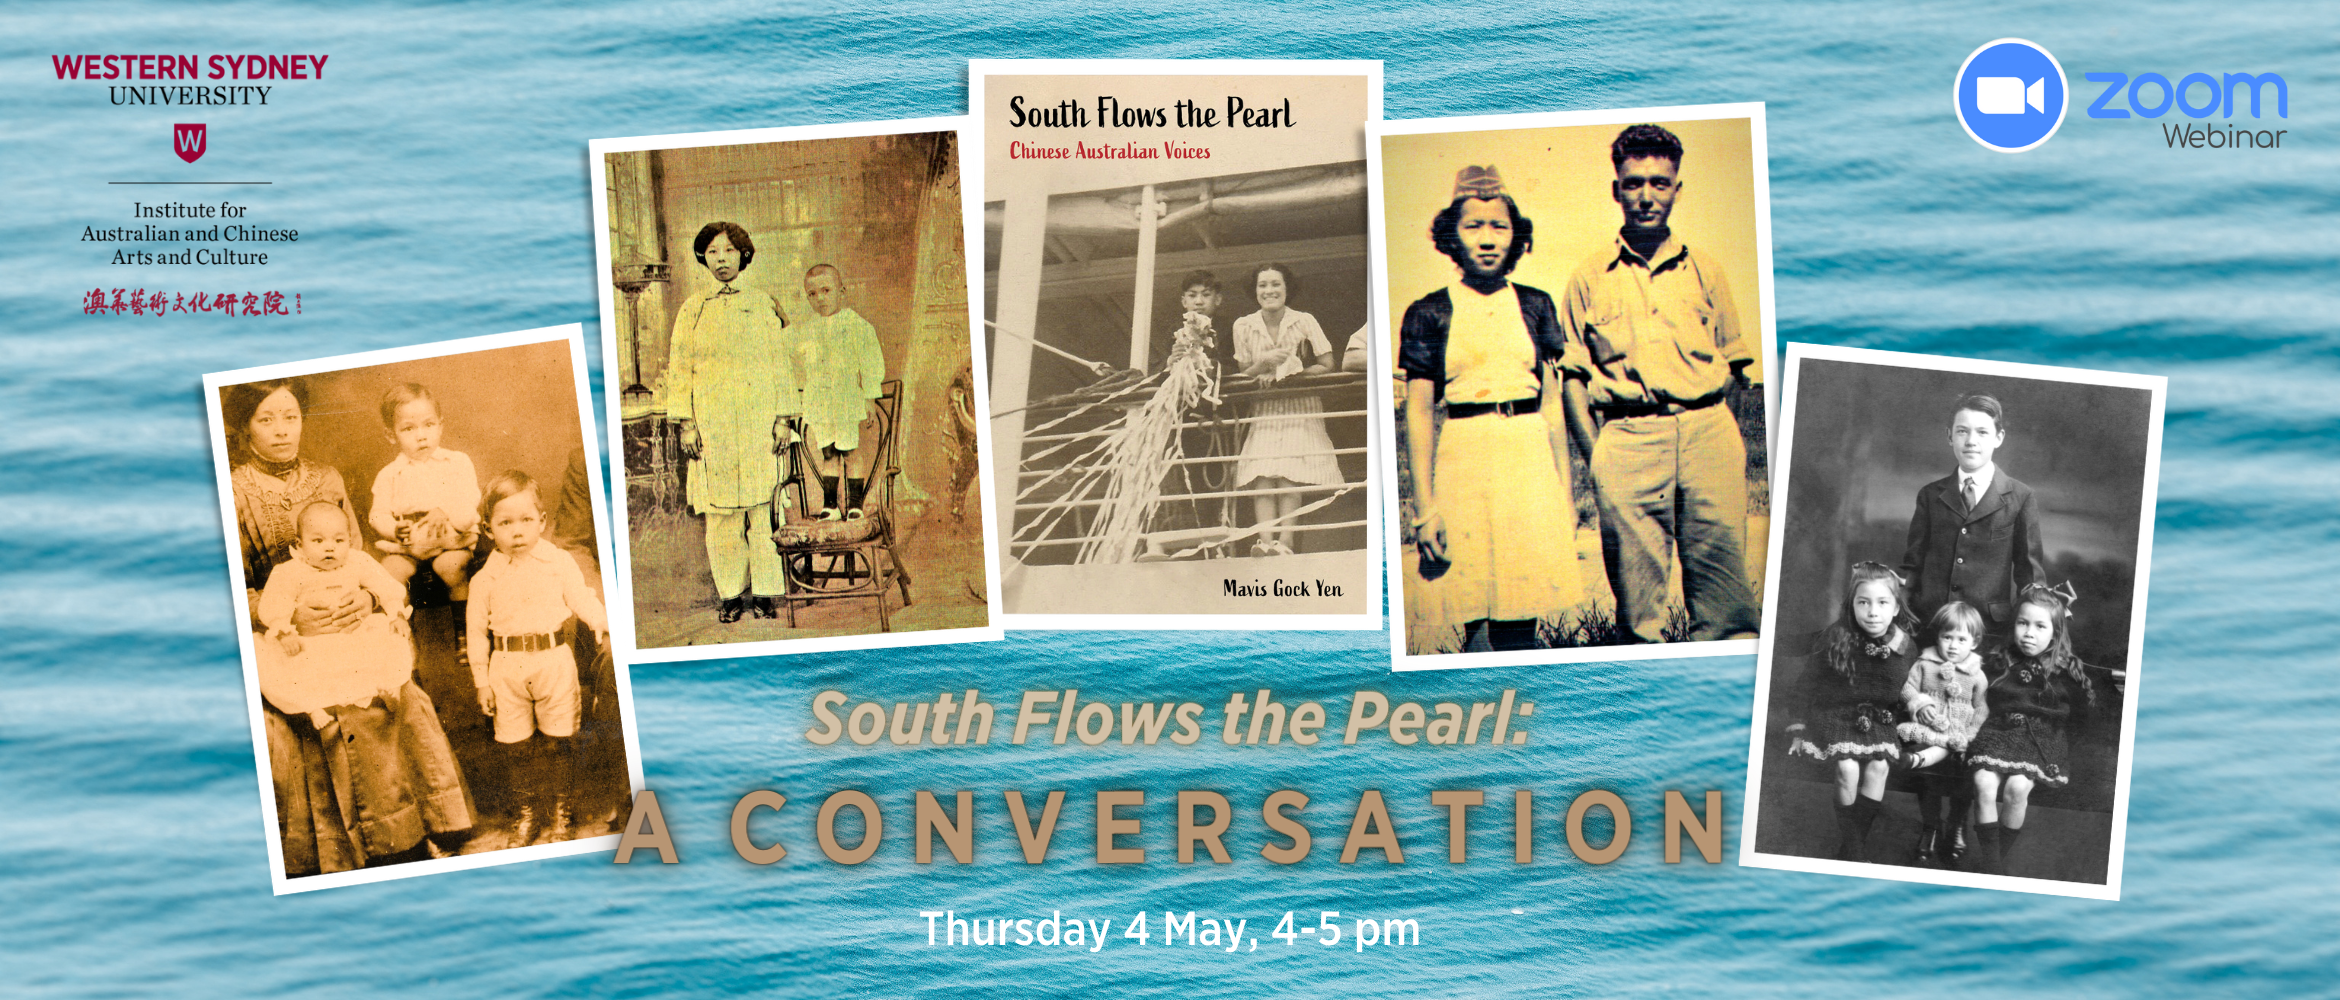 South Flows the Pearl: the Conversation